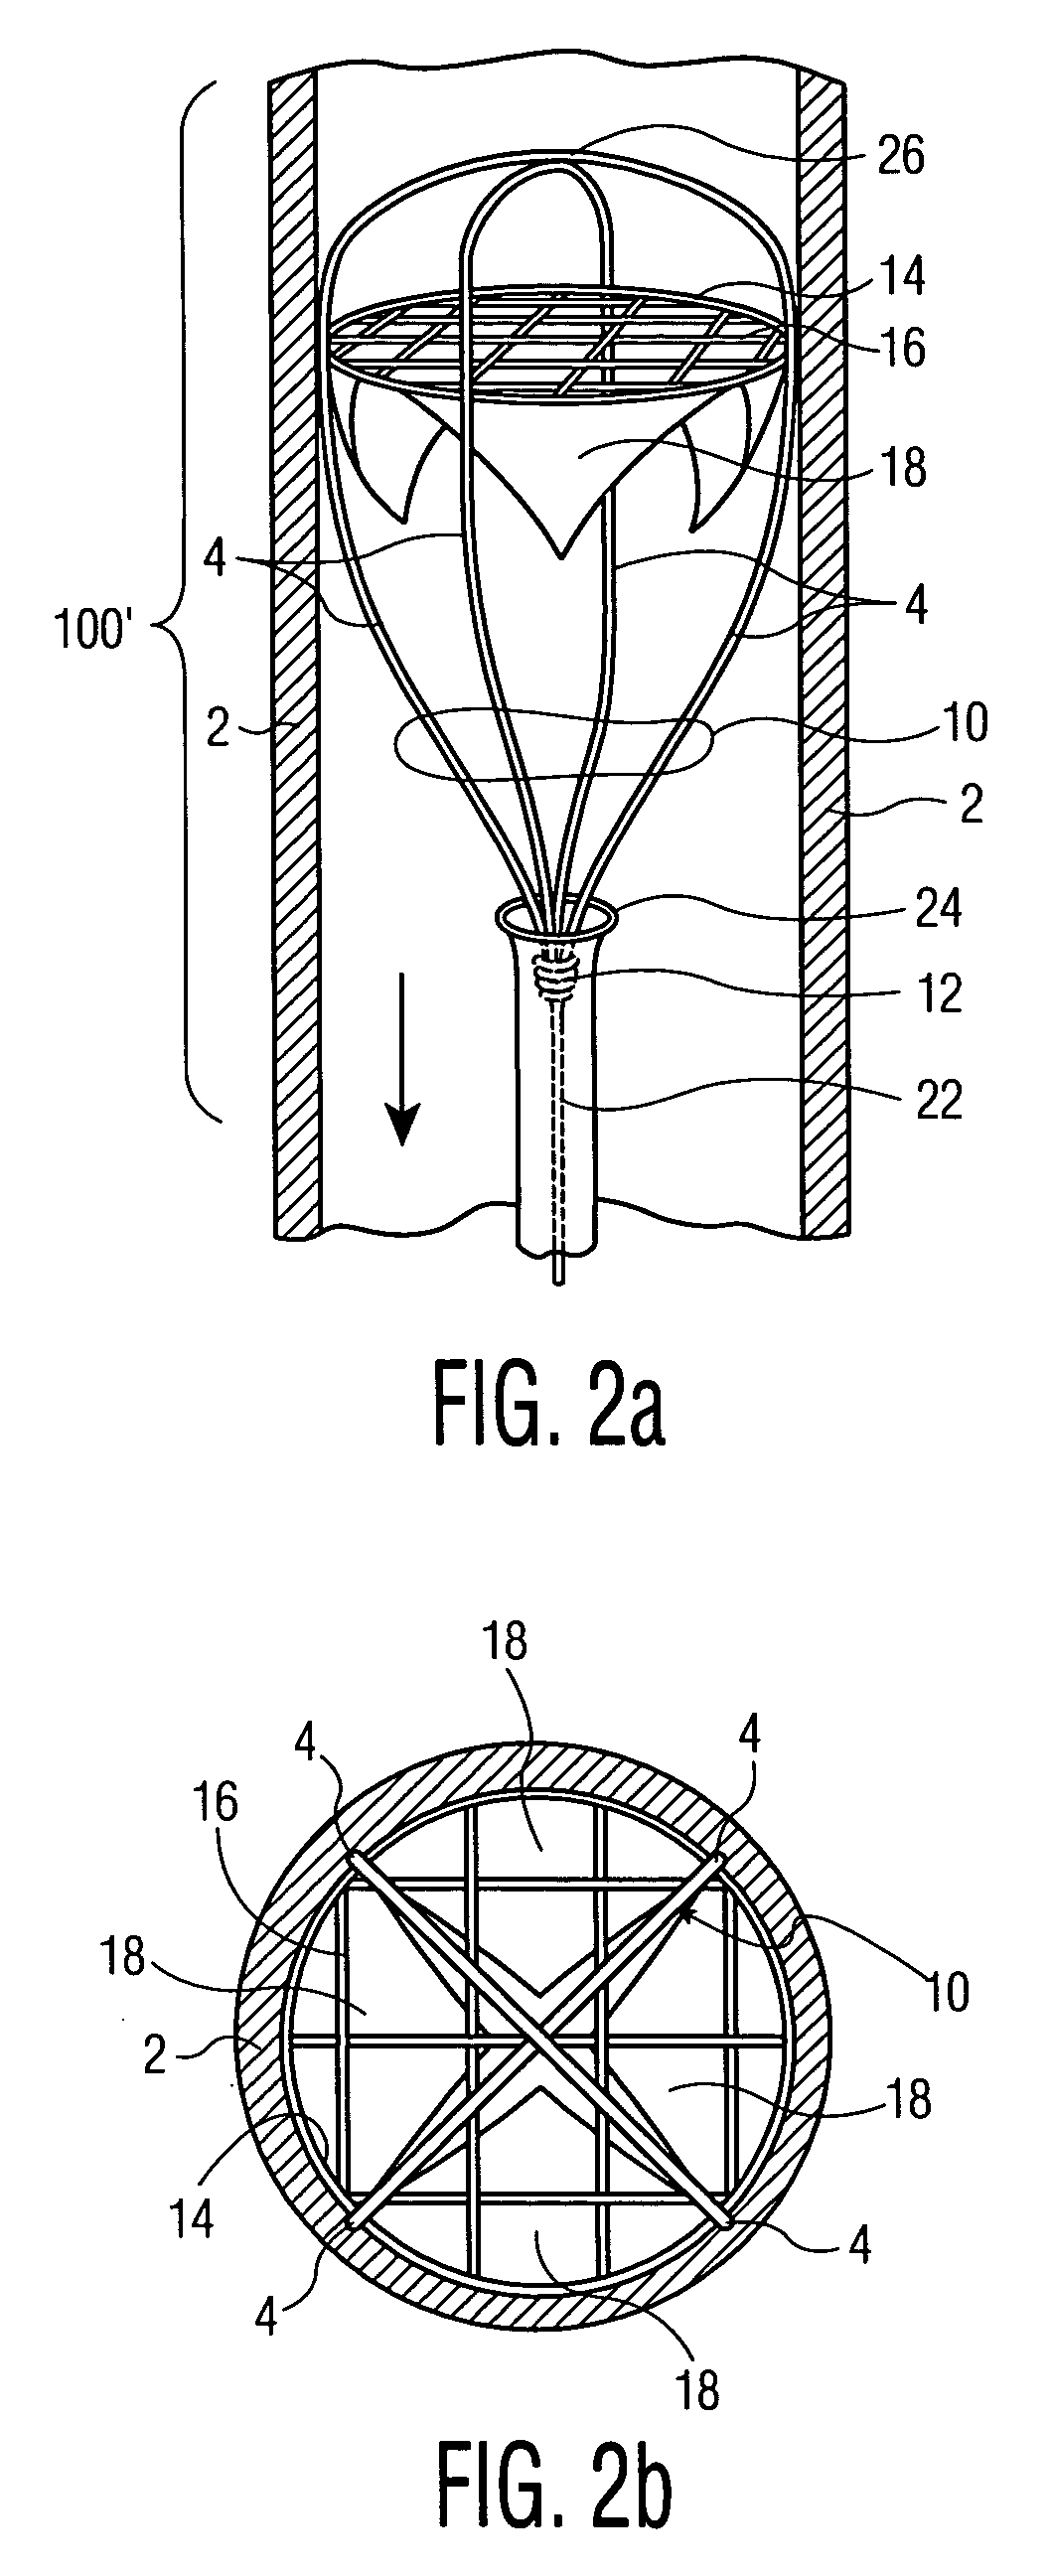 Method of treatment and devices for the treatment of left ventricular failure